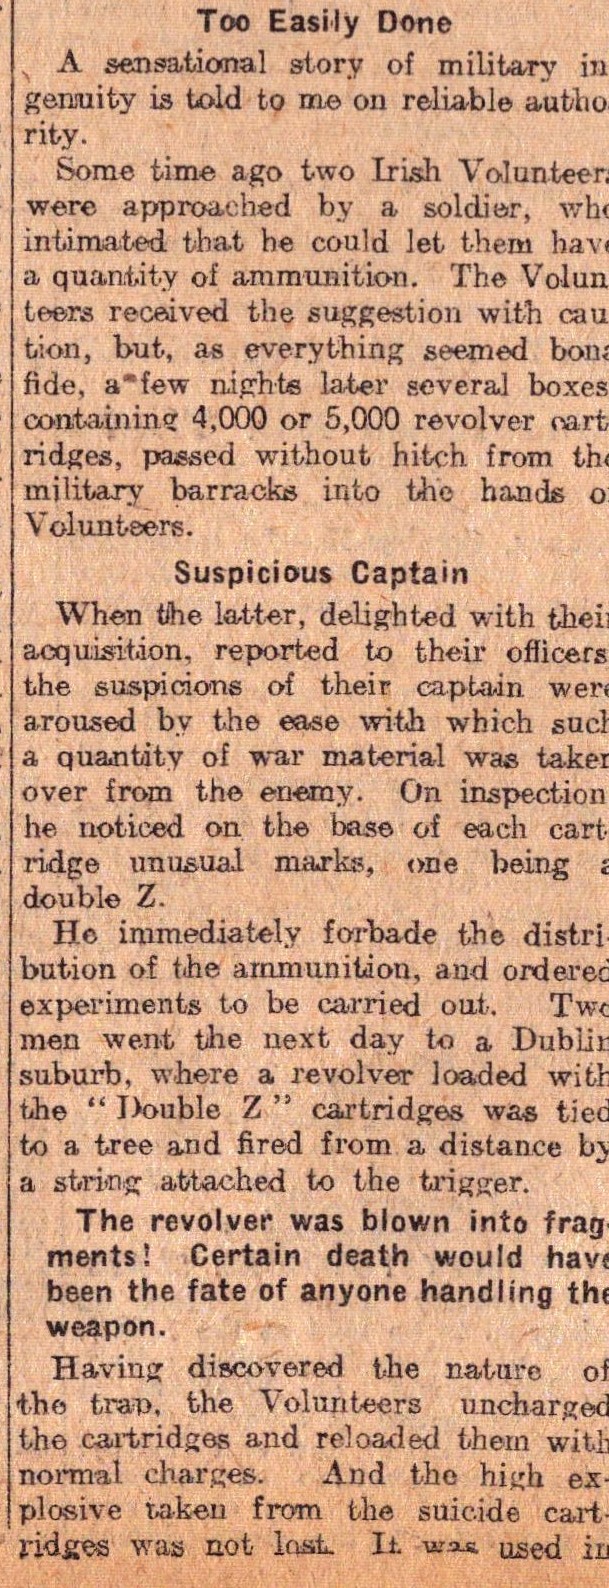 Irish War of Independence News Reports Black & Tans, Hunger Strikes 1920-5. - Image 6 of 7